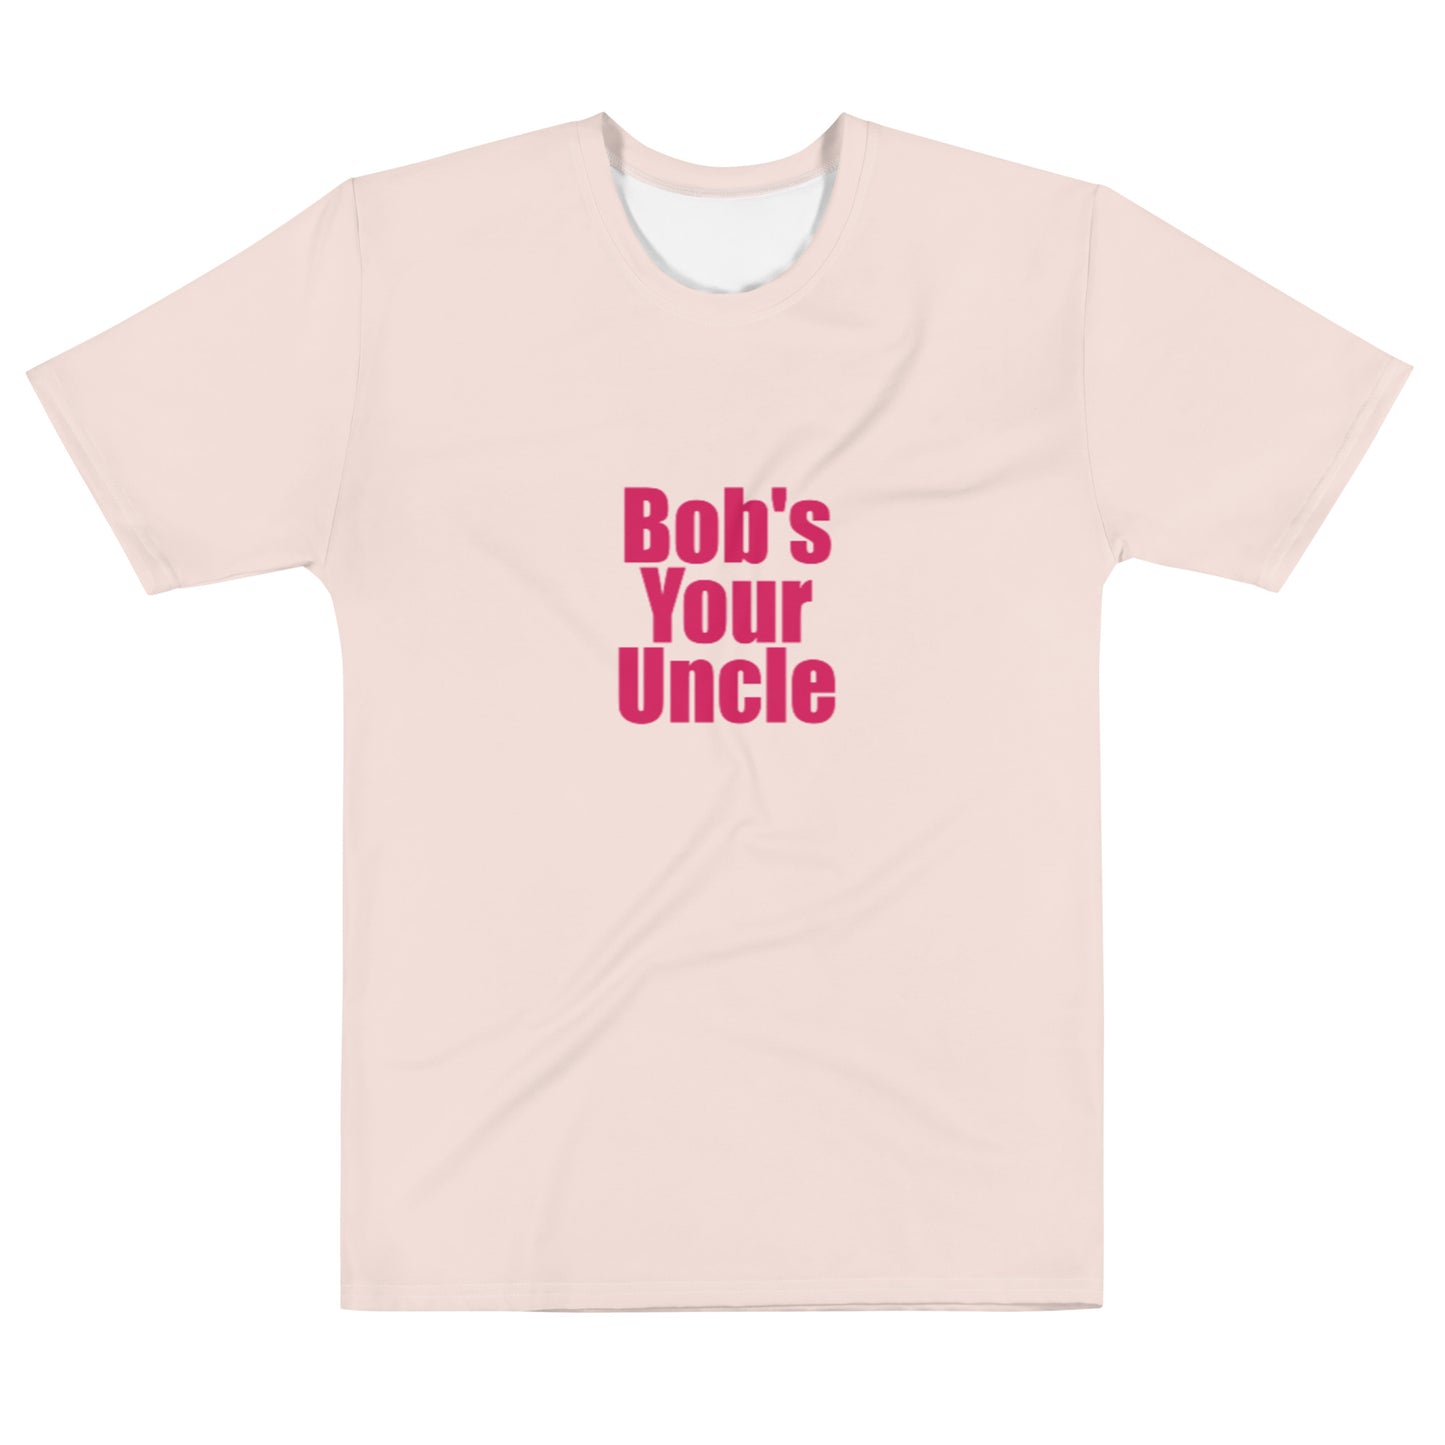 Bob's Your Uncle - Sustainably Made Men's Short Sleeve Tee